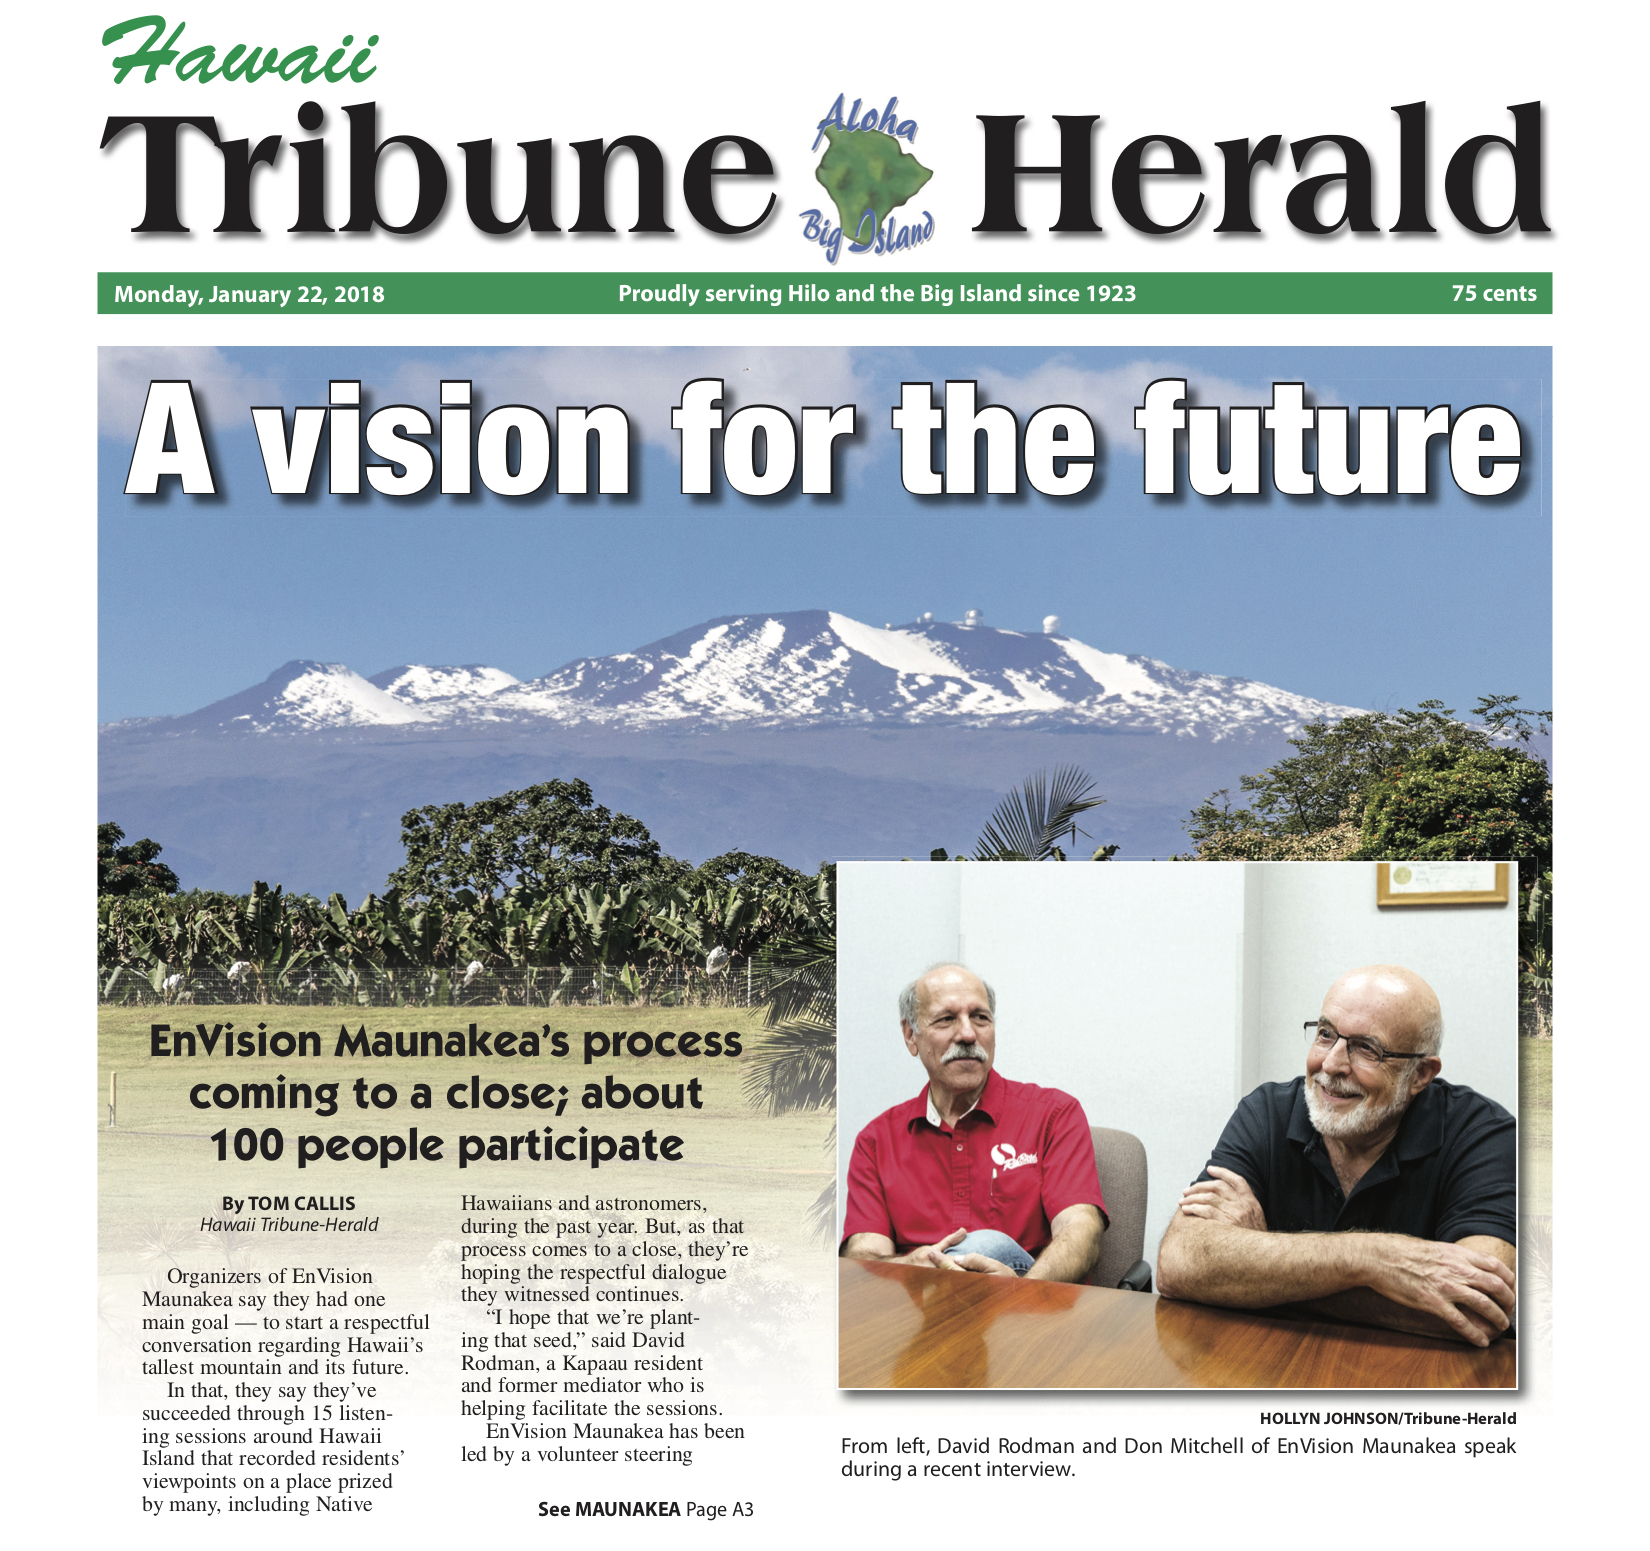 January 22, 2018 article in Hawaii Tribune Herald, "A vision for the future"